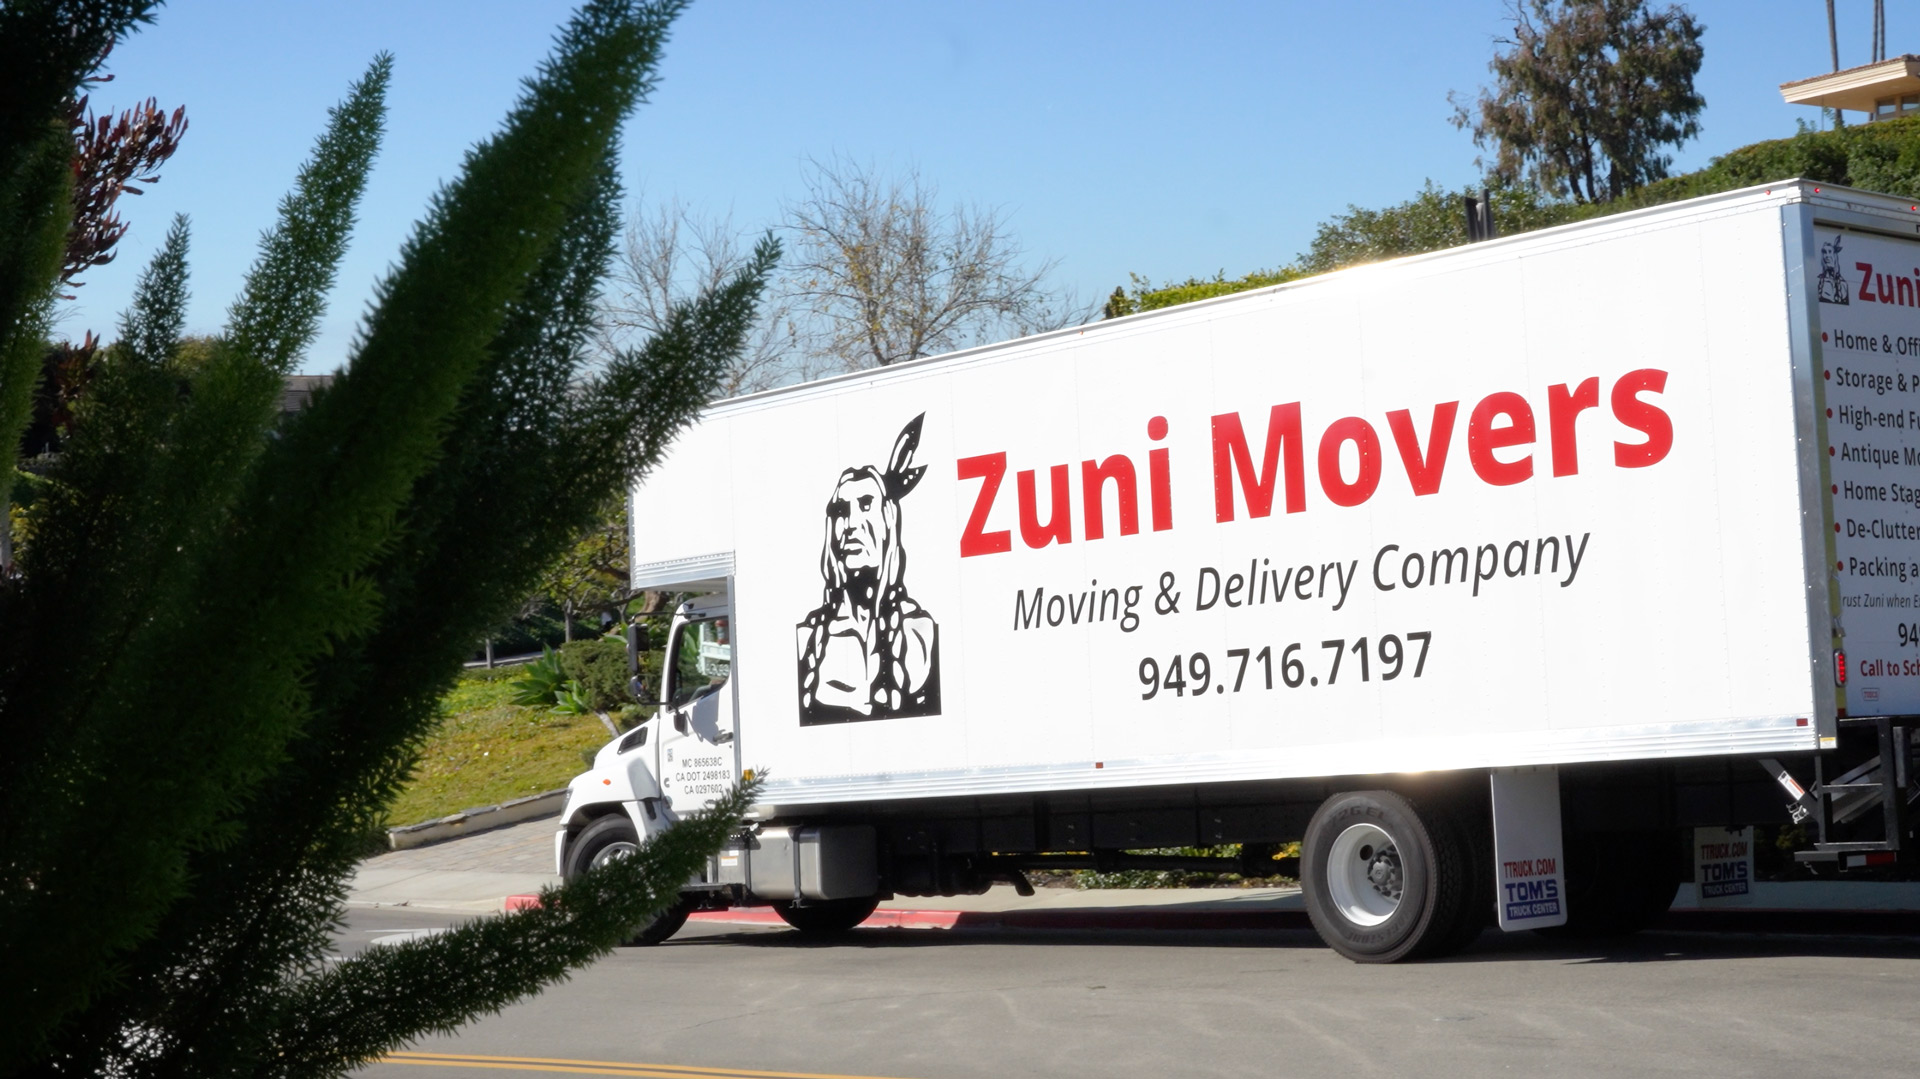 Zuni Movers Moving Truck